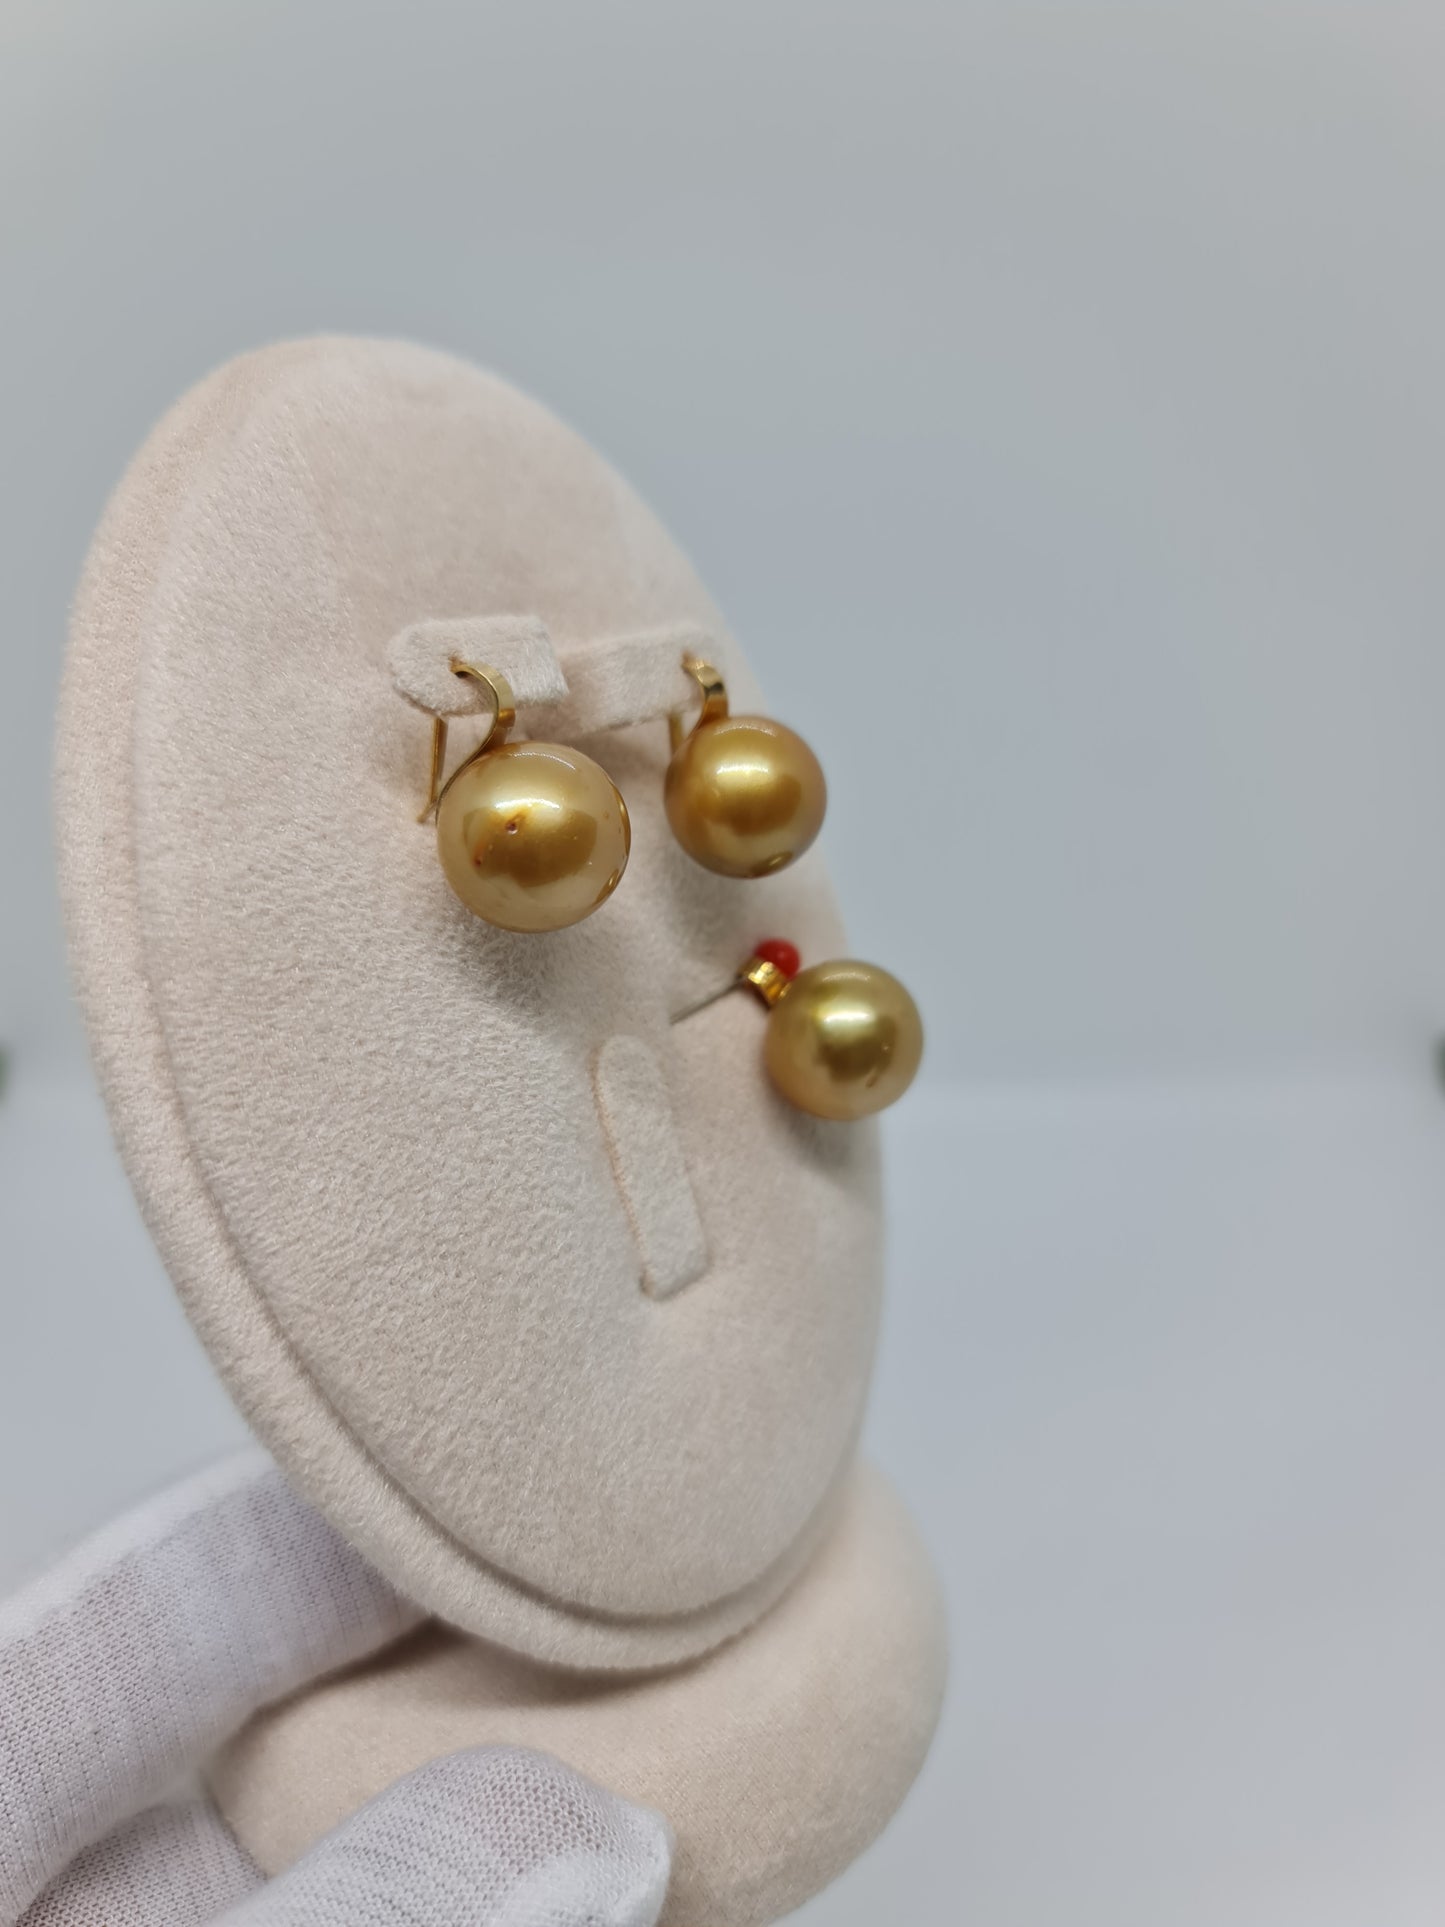 13mm to 13.7mm Golden South Sea Pearls Set in 14K Gold